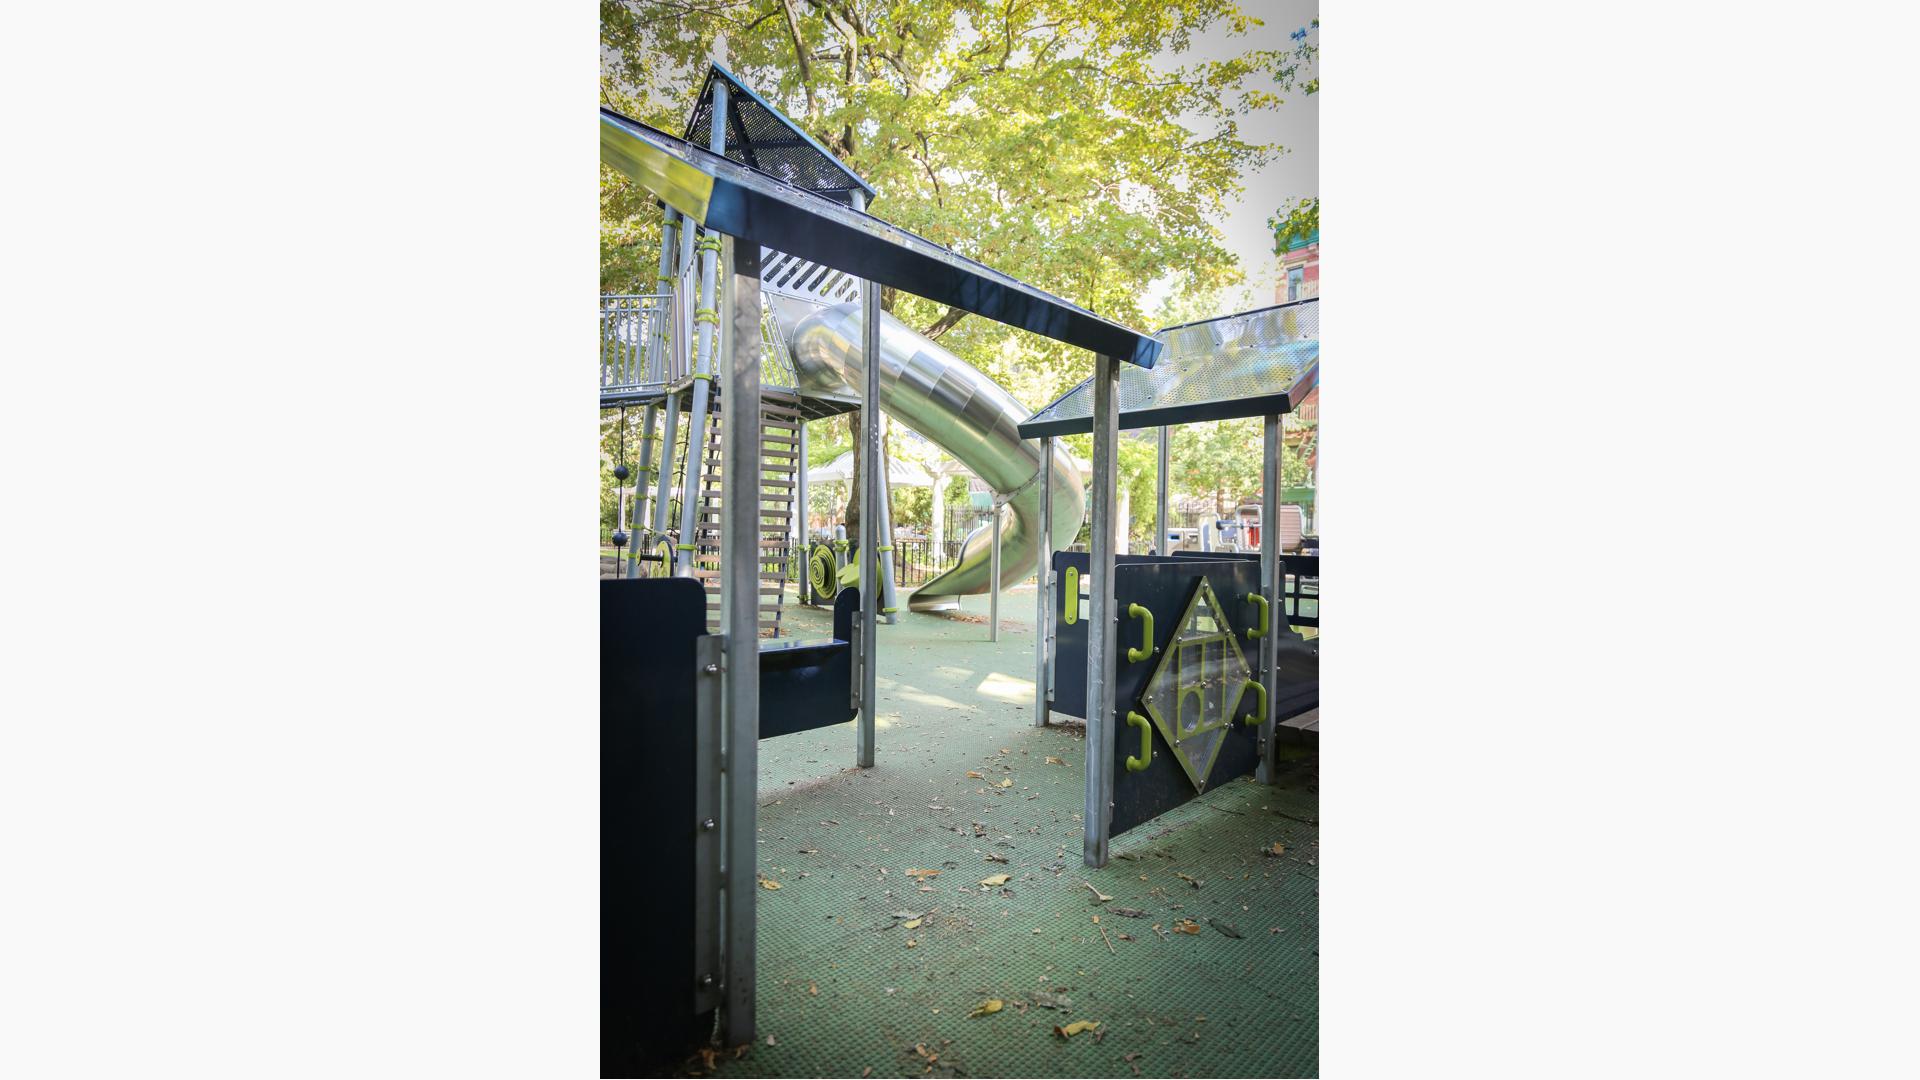 Stainless steel Play Booster tunnel slide at Joseph C. Sauer Park